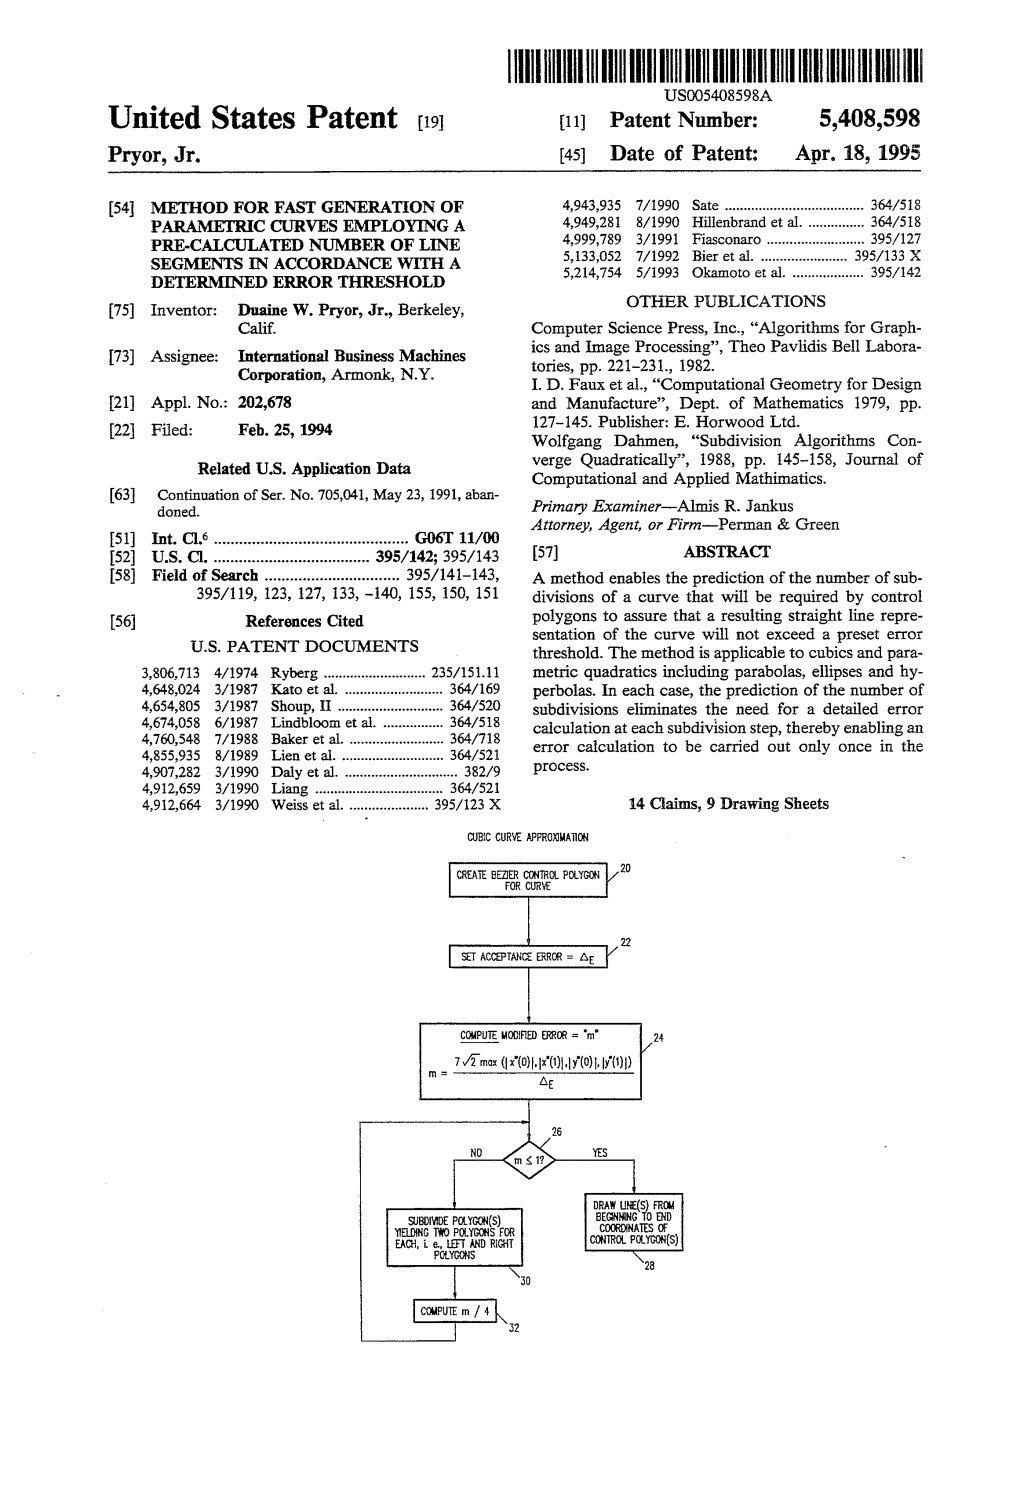 ||||||||||||III USOO540.8598A United States Patent (19) 11 Patent Number: 5,408,598 Pryor, Jr